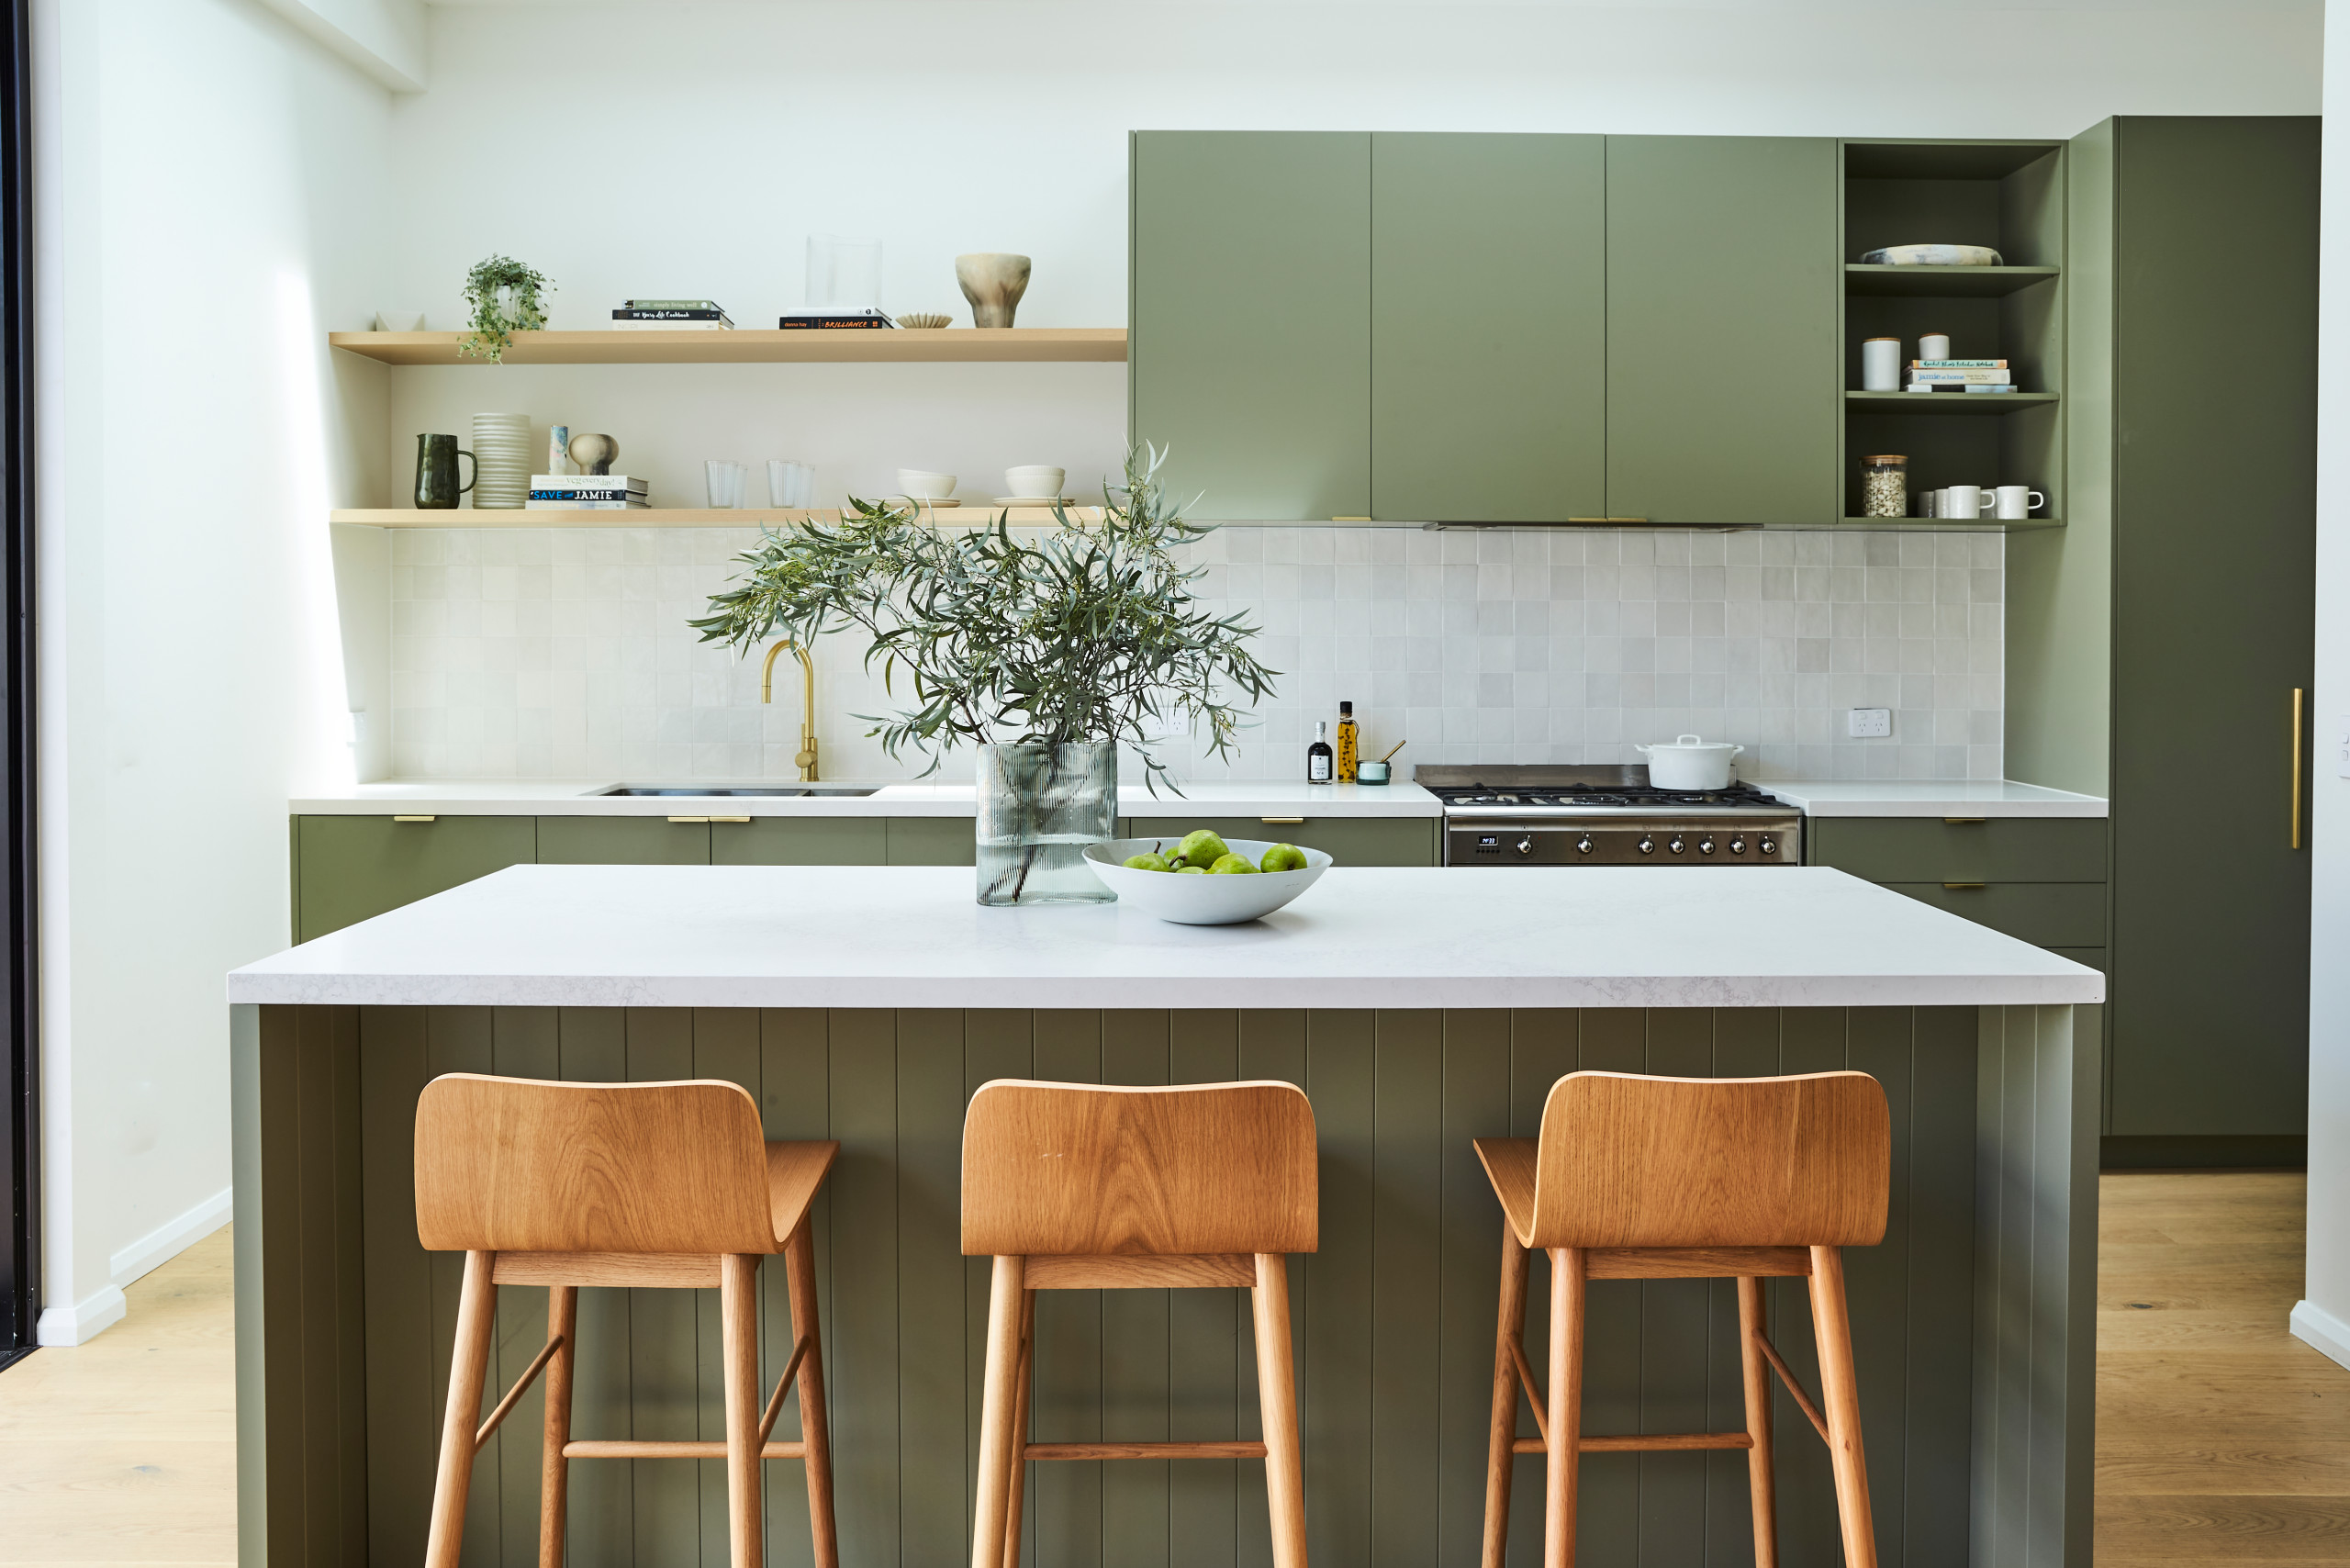 20 Useful Sage Green Kitchen Cabinets for Your Next Reno